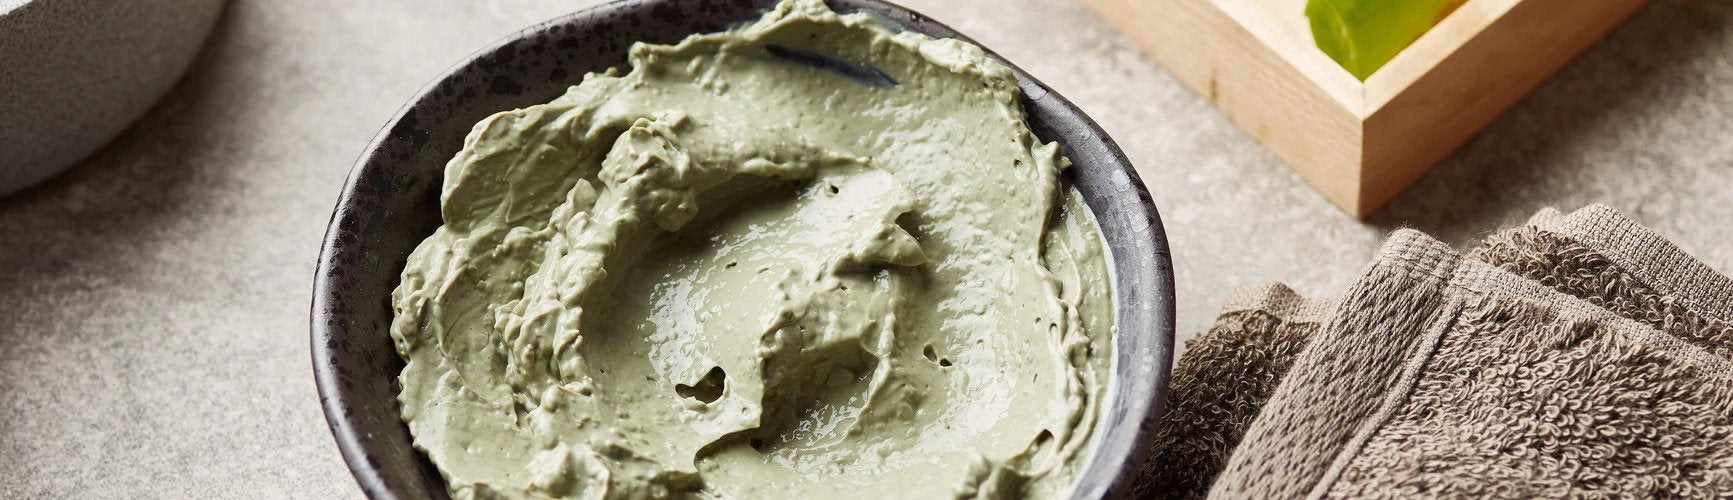 Our top DIY natural face mask recipes that will give your skin a revitalizing boost